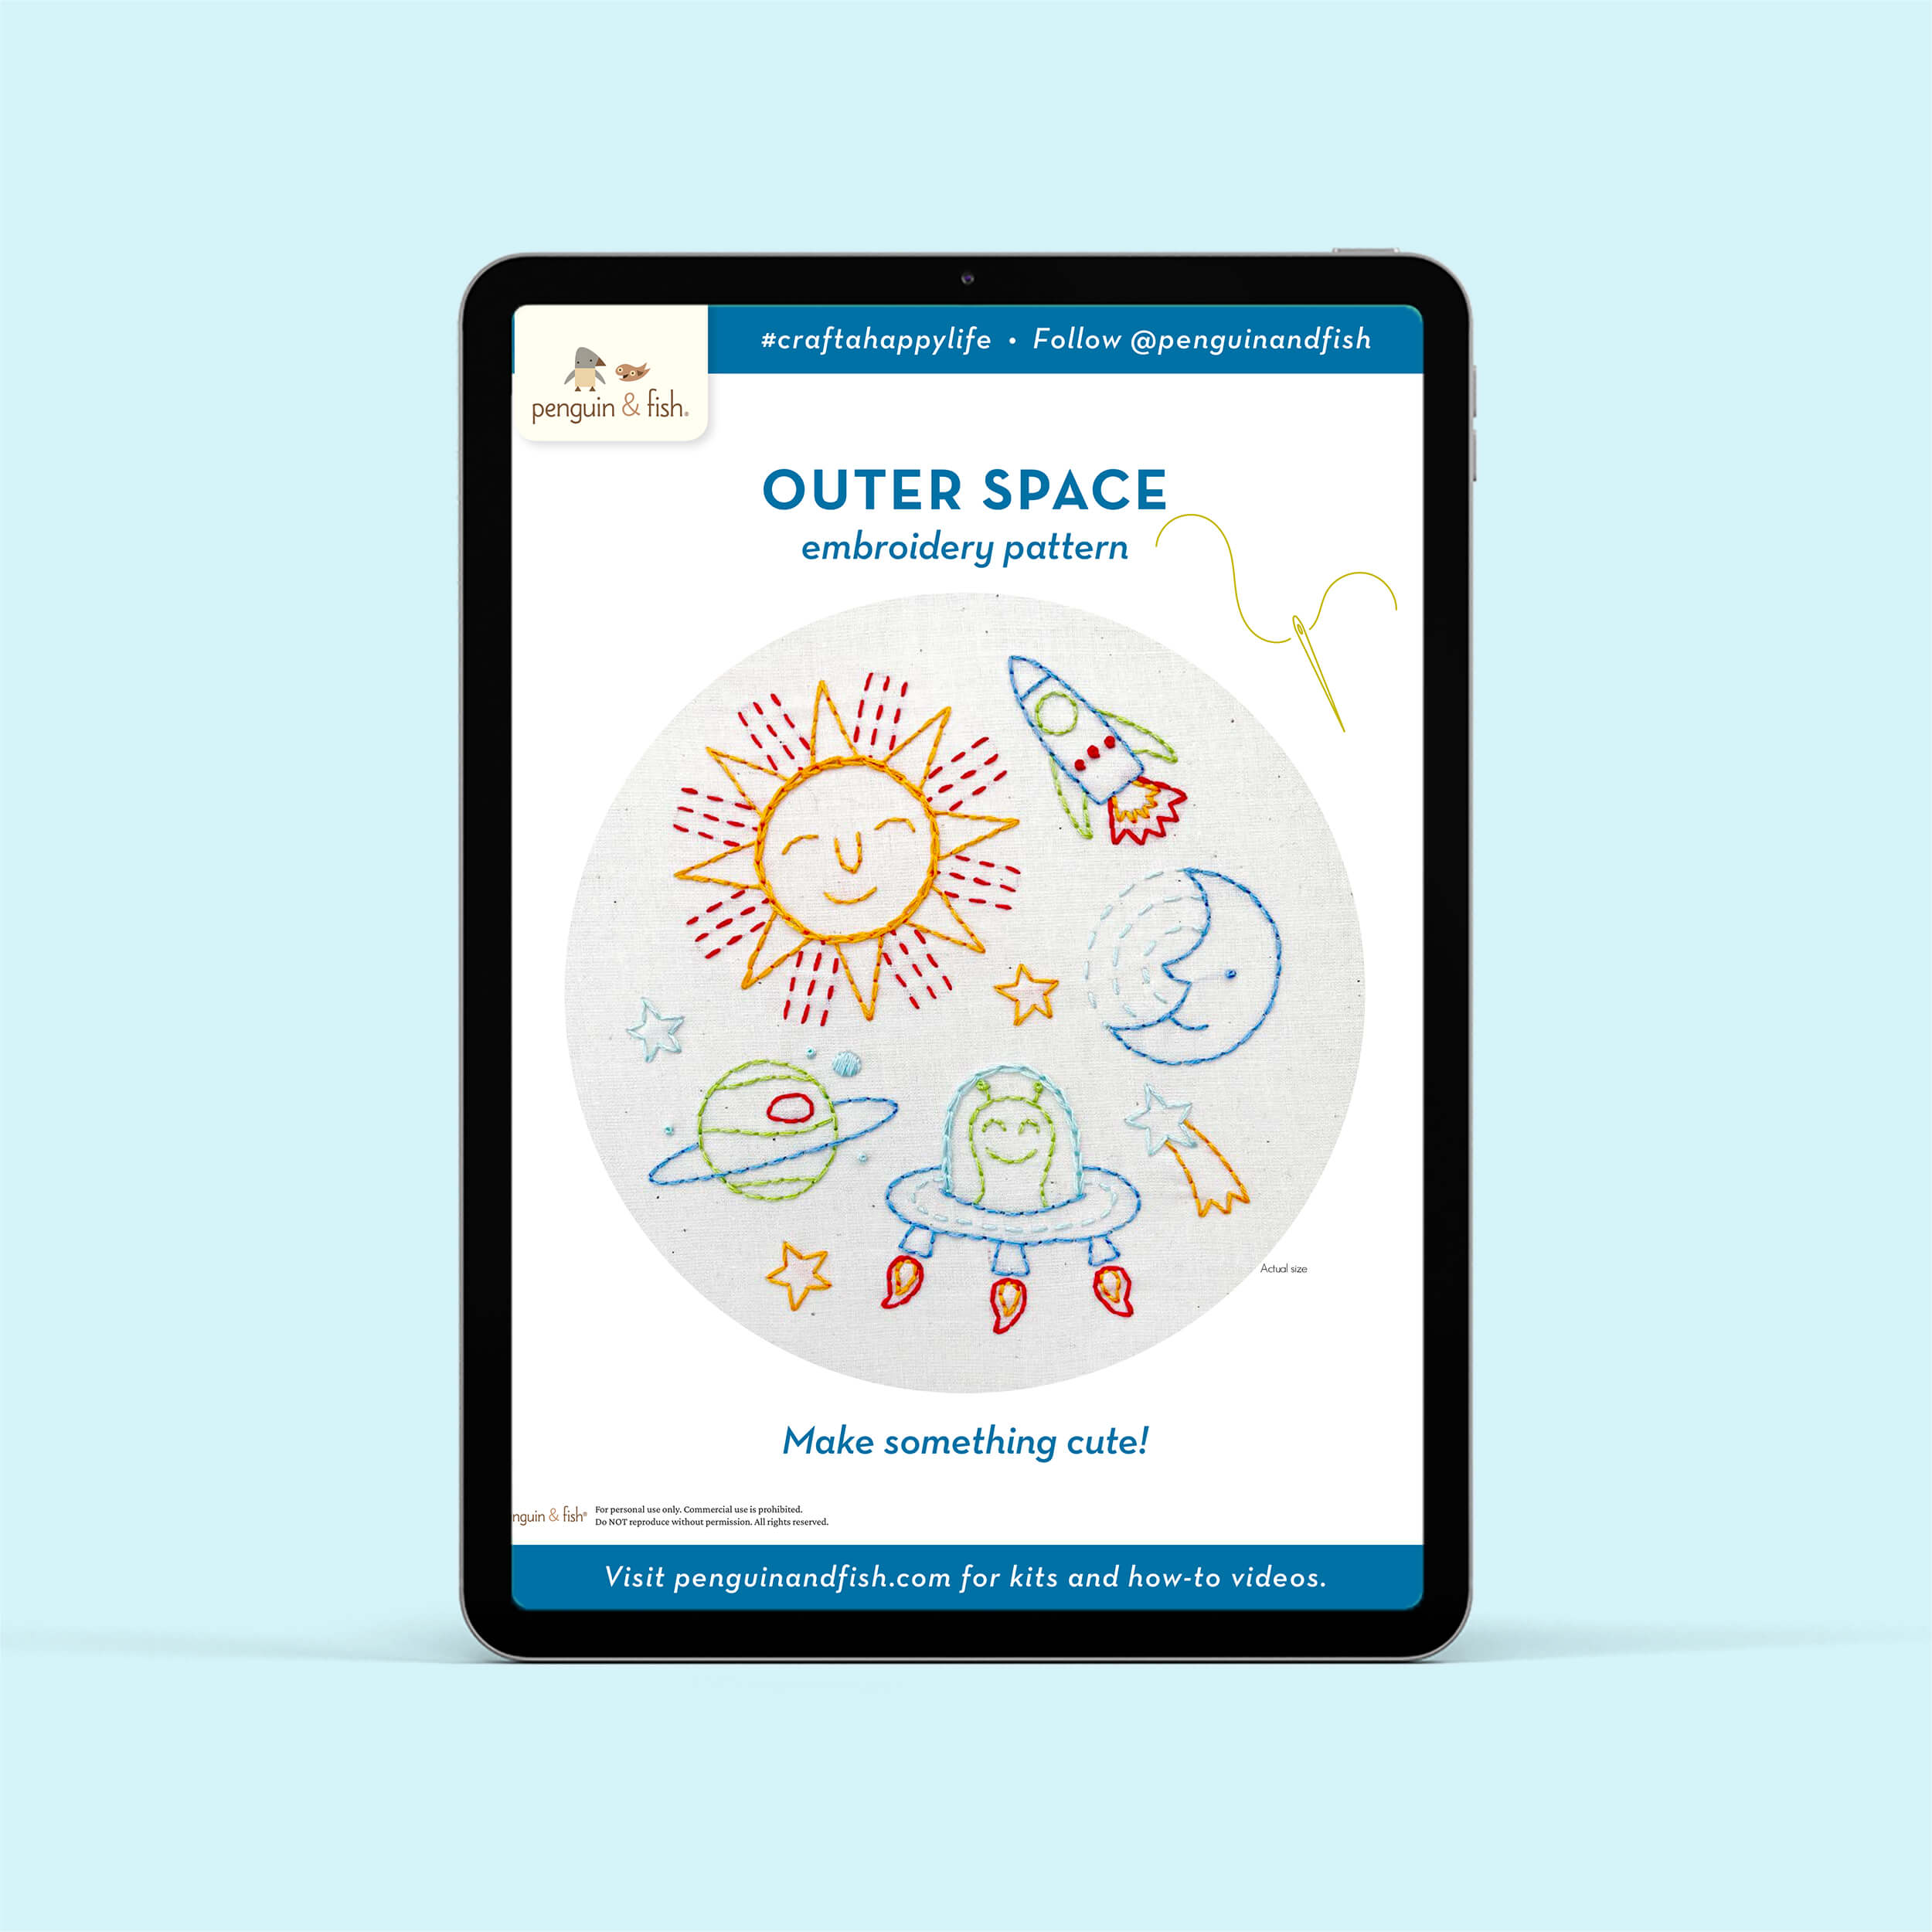 Outer Space PDF embroidery pattern shown on a tablet